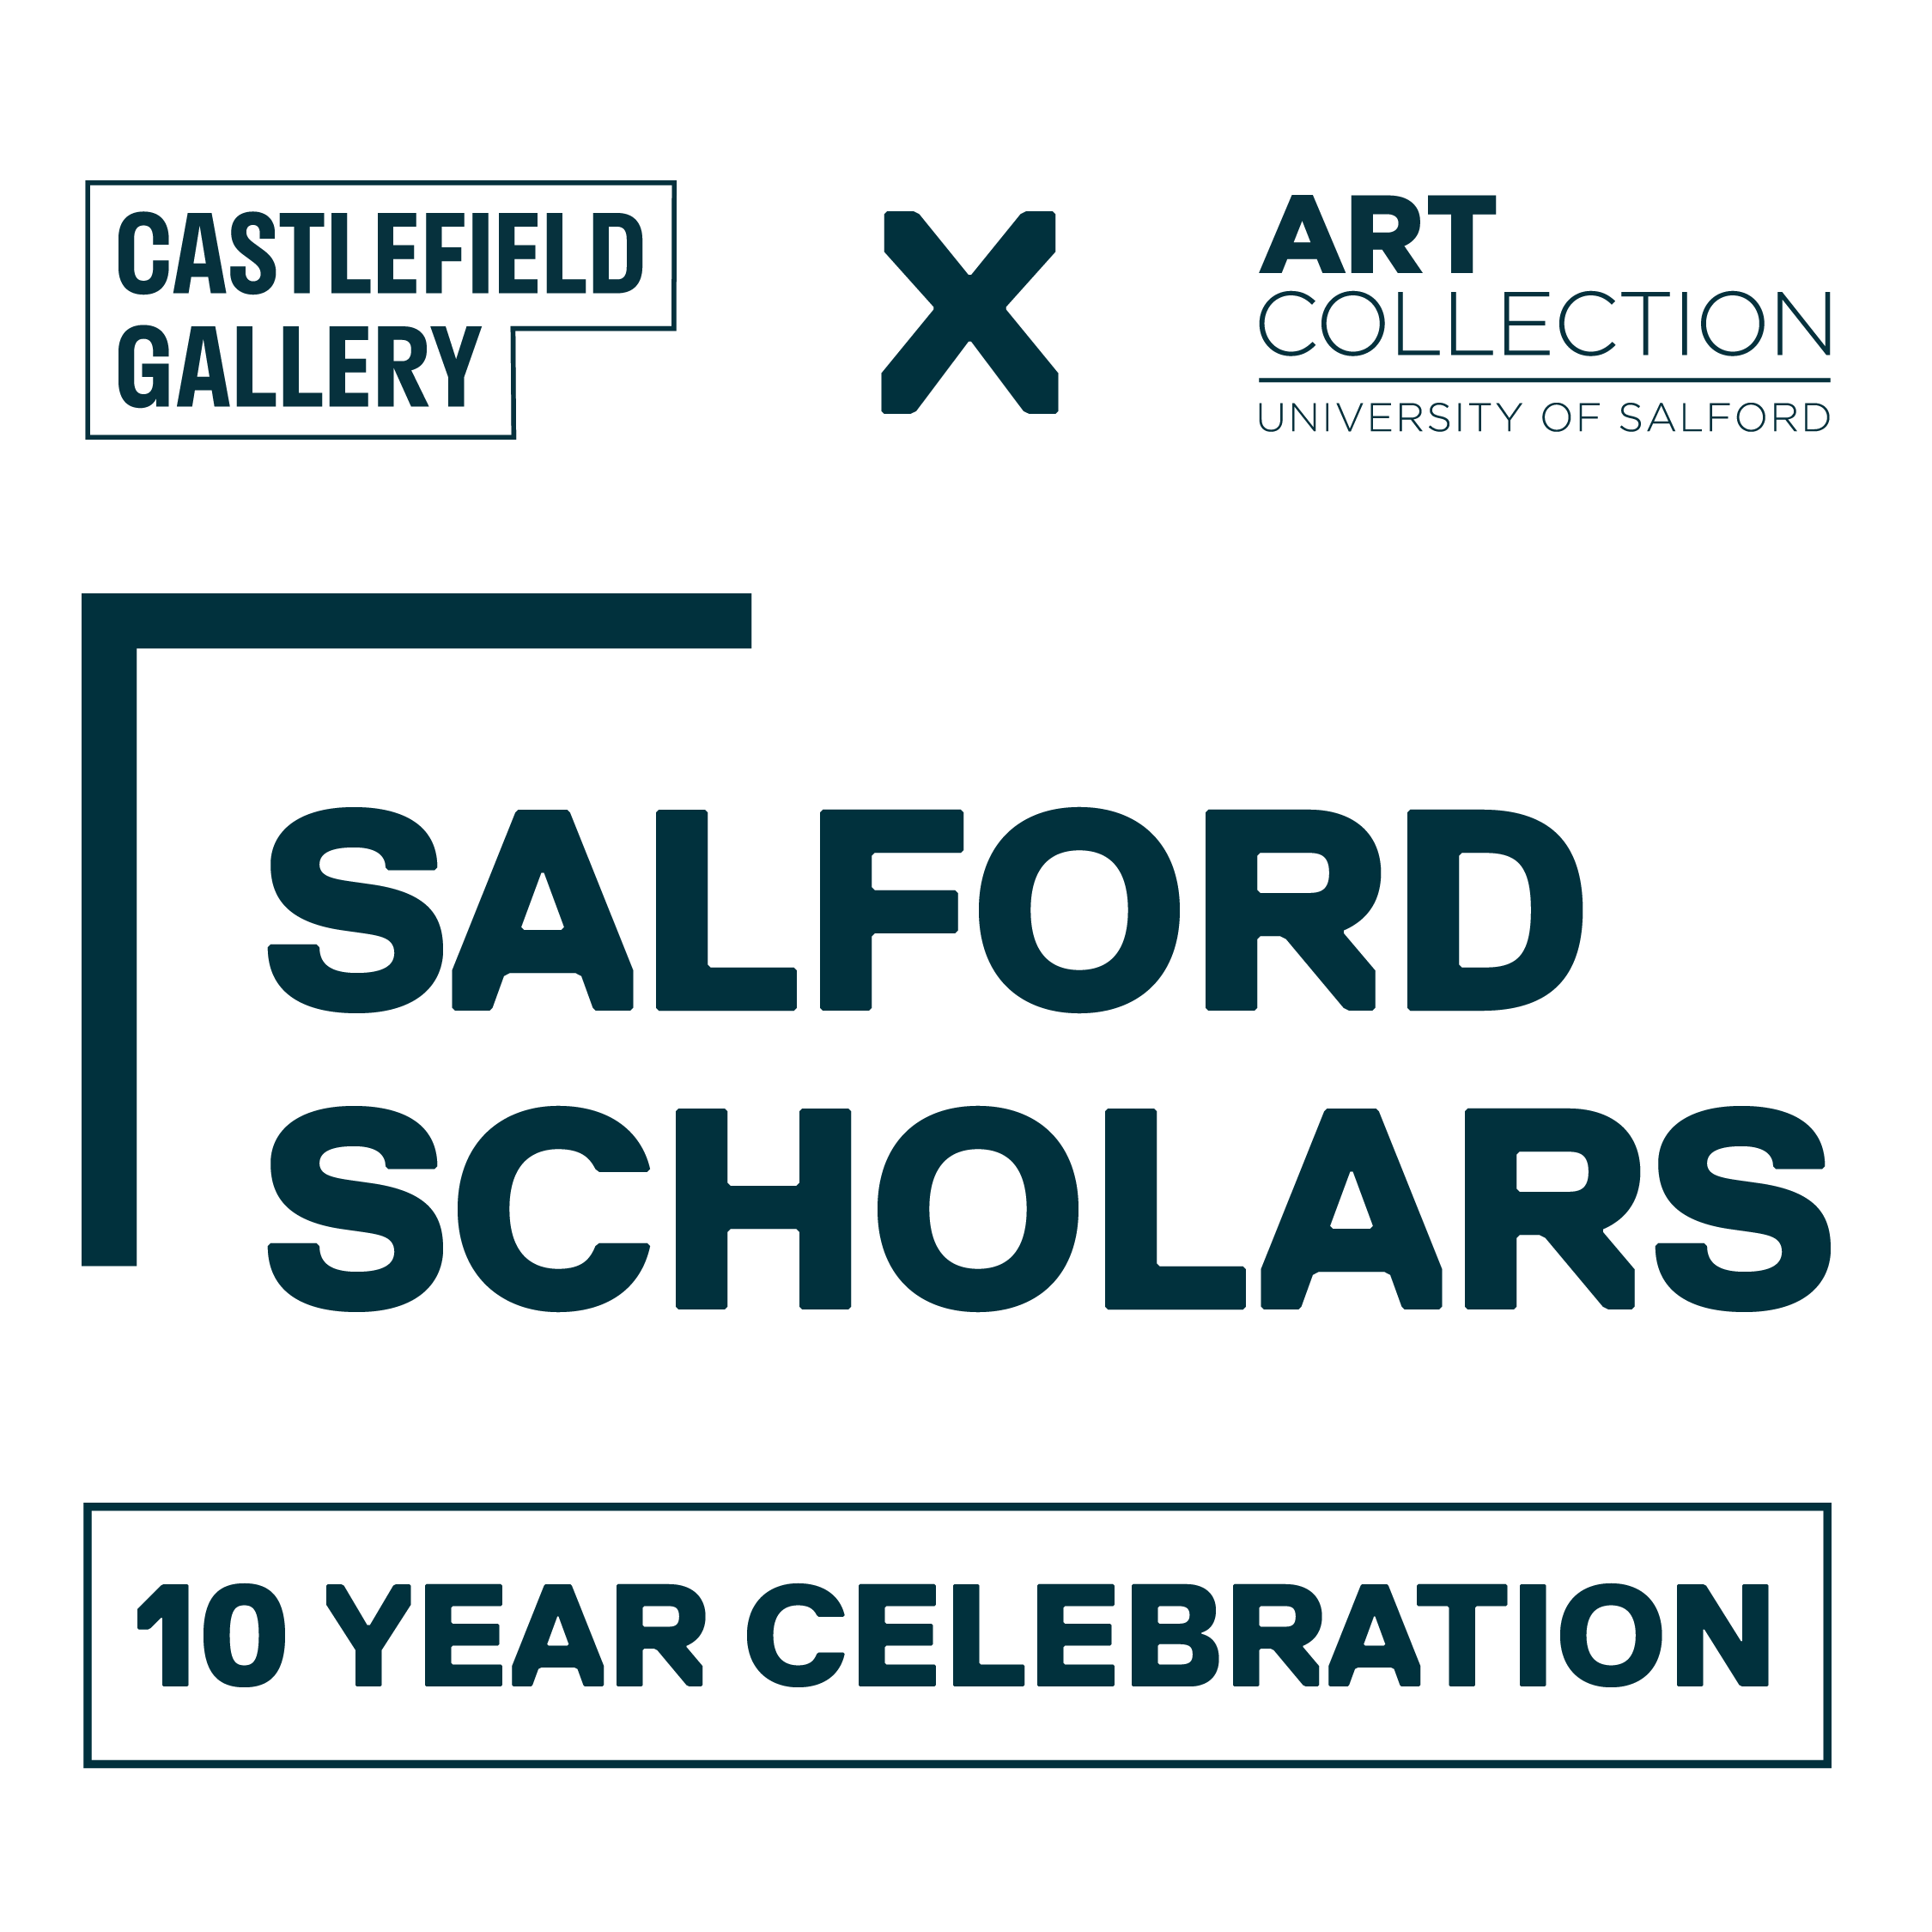 University of Salford Art Collection & Castlefield Gallery